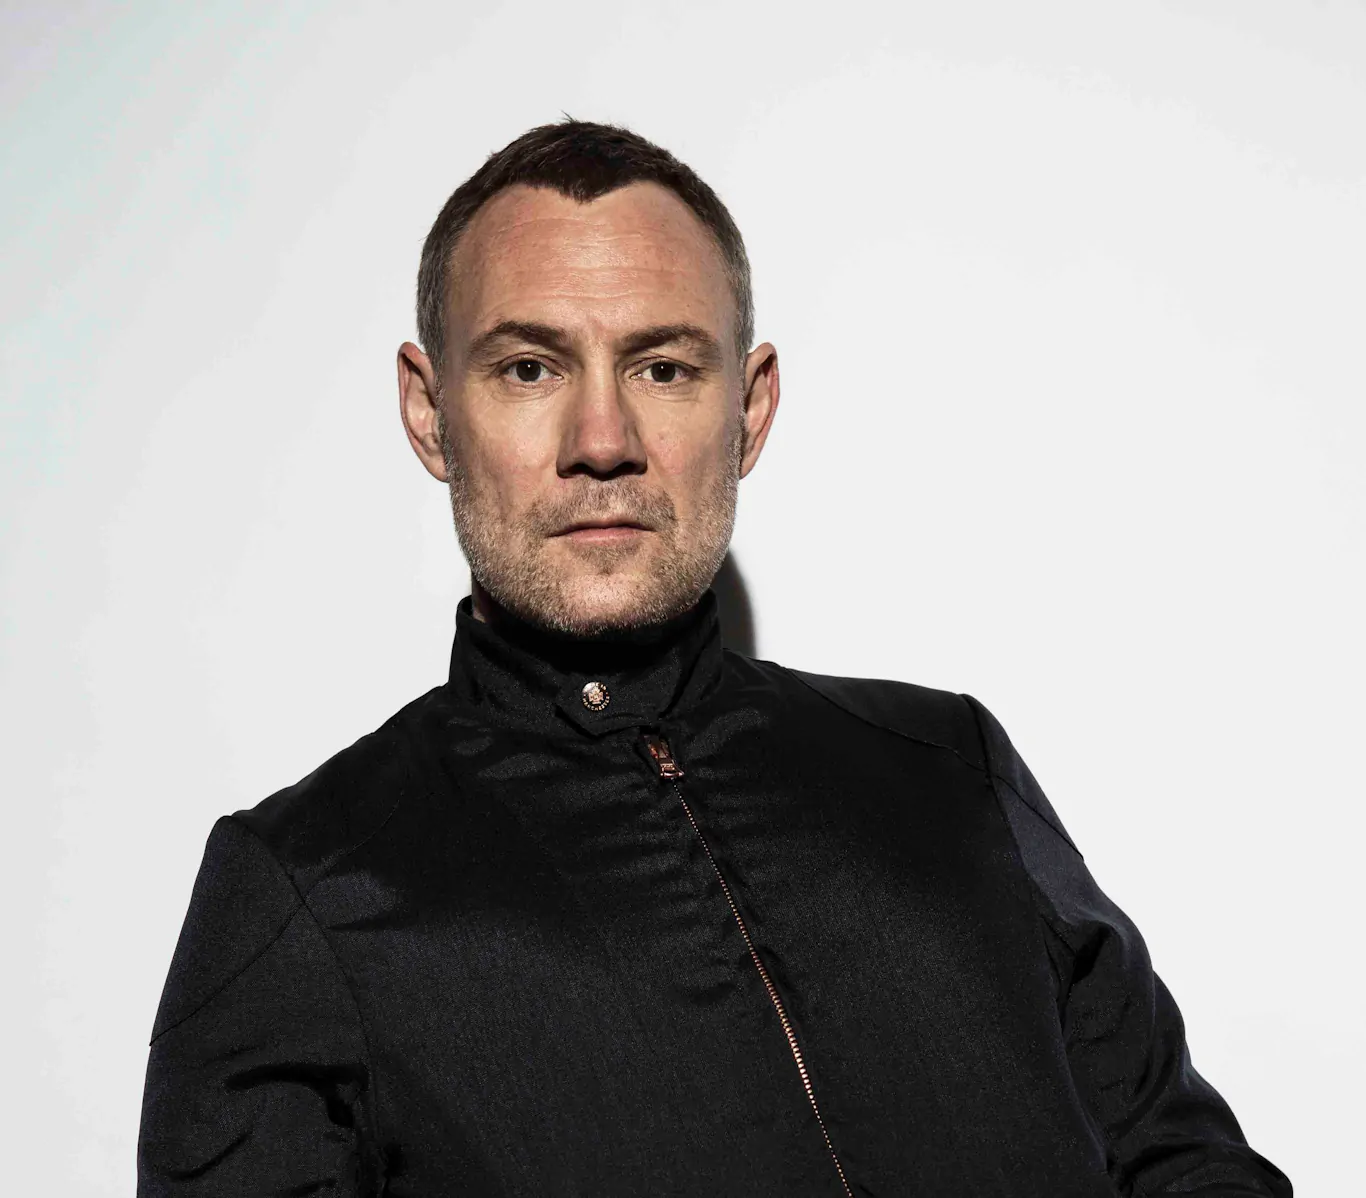 DAVID GRAY and his Skellig choir announce a series of intimate shows in early 2023